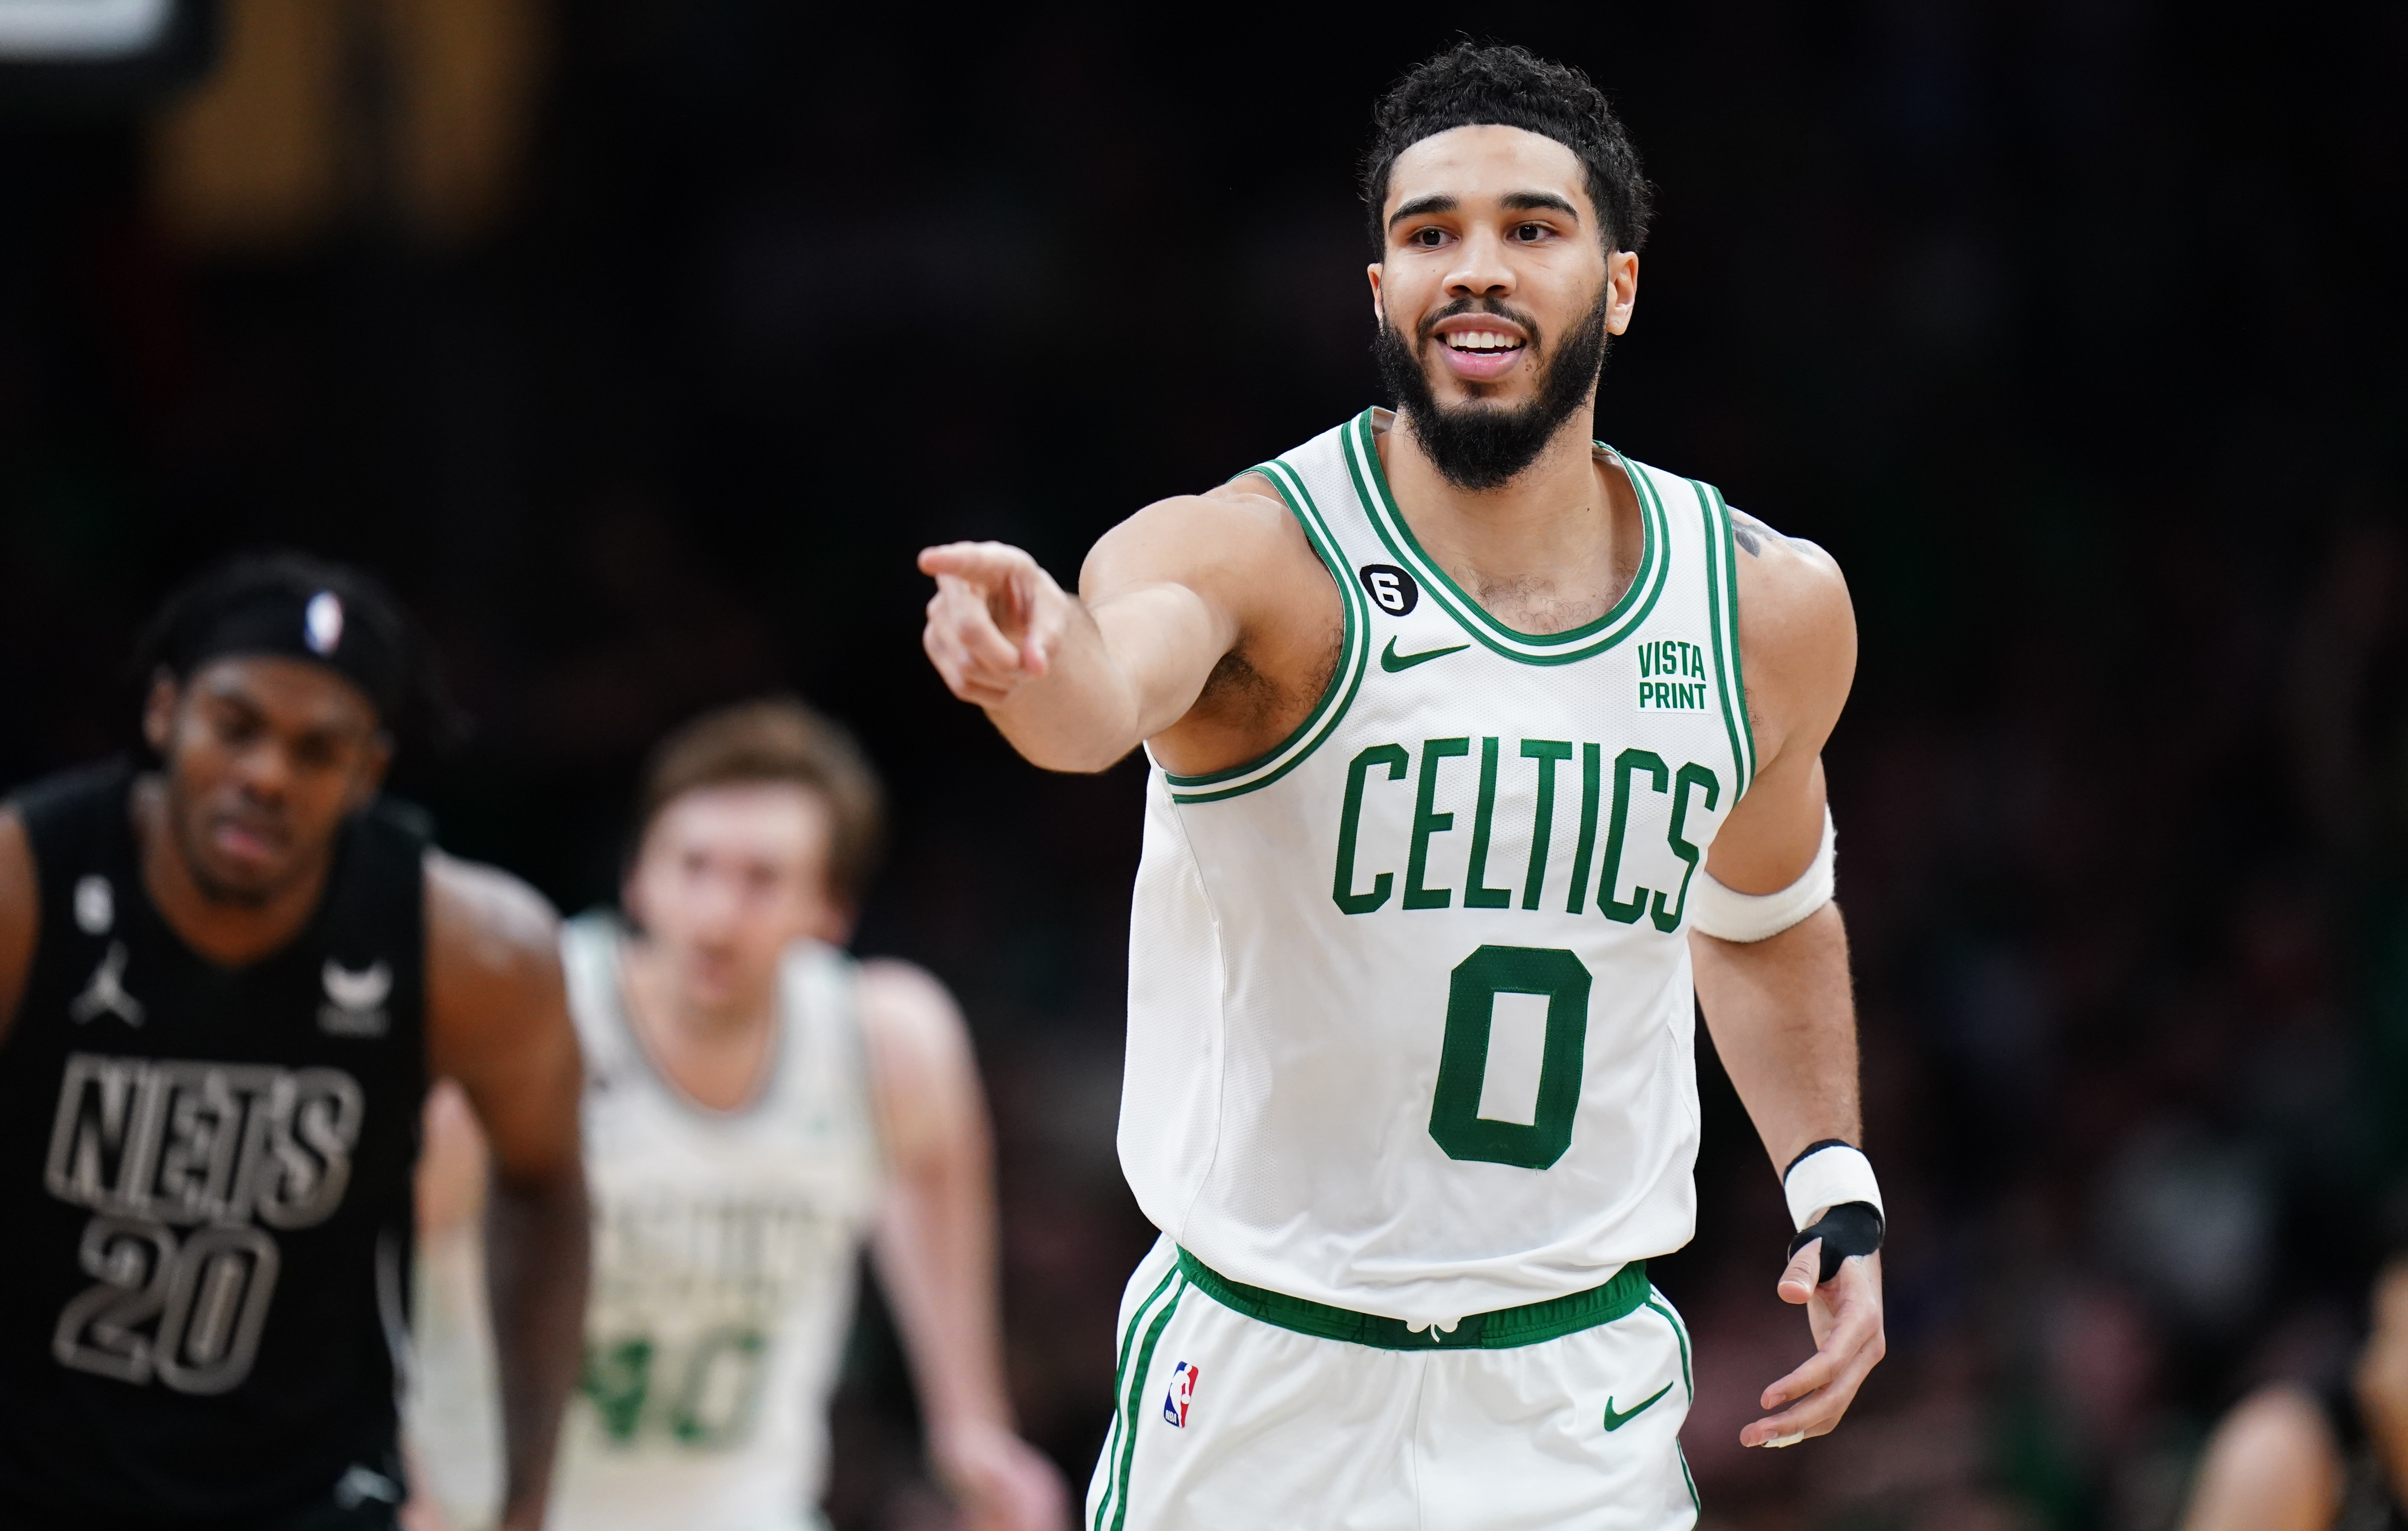 Most Valuable NBA Parlay For Friday, Feb. 3: Back Celtics, Raptors & 76ers To Win